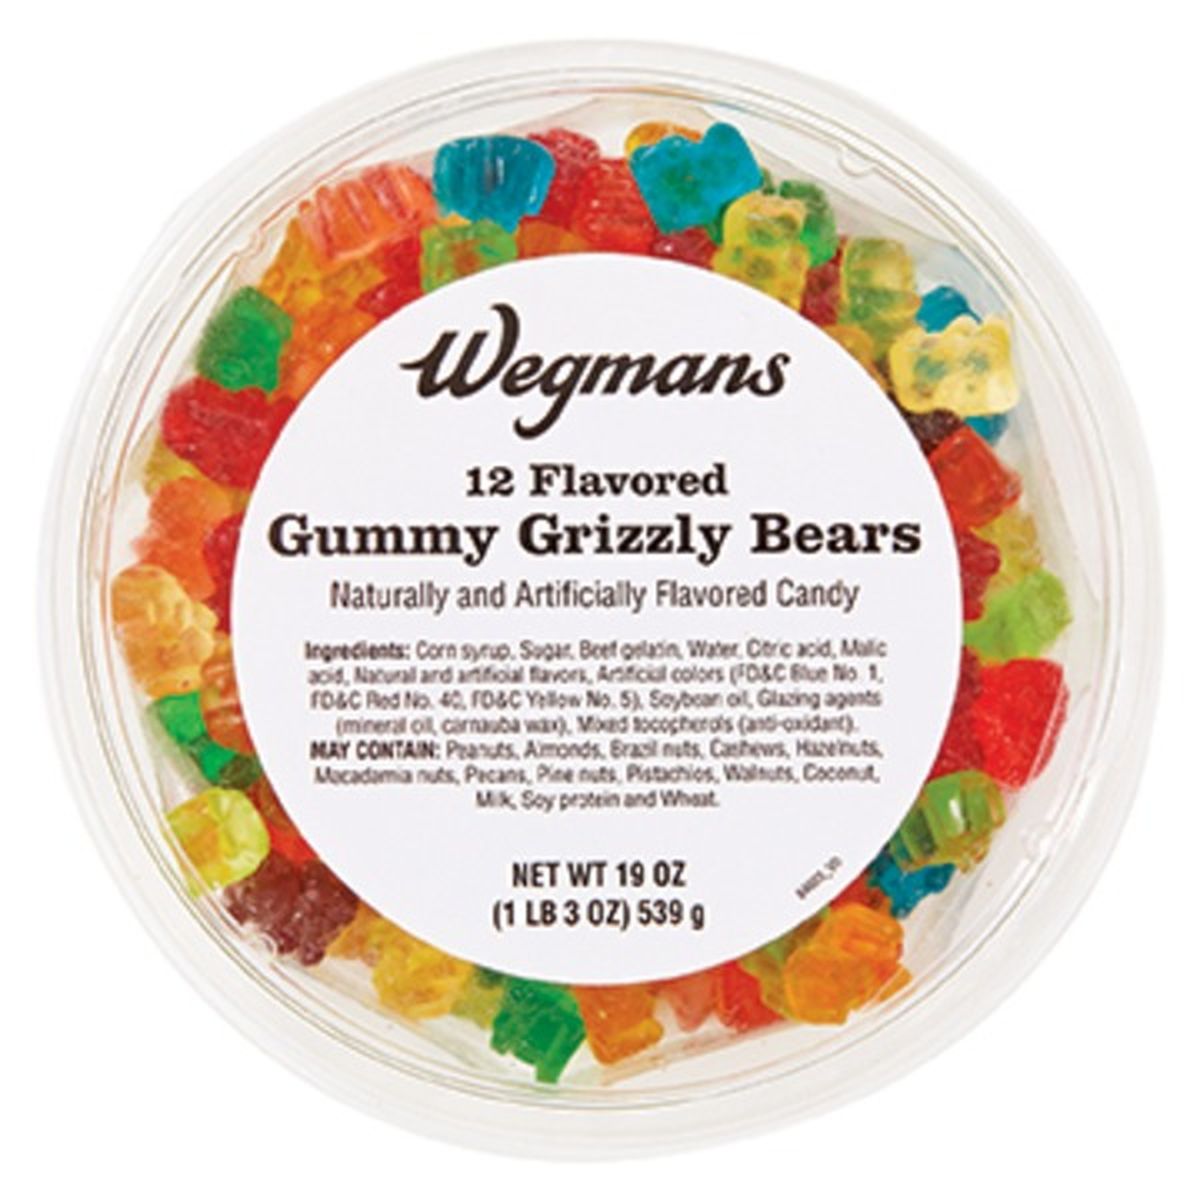 Calories in Wegmans Gummy Grizzly Bears 12 Flavored Candy